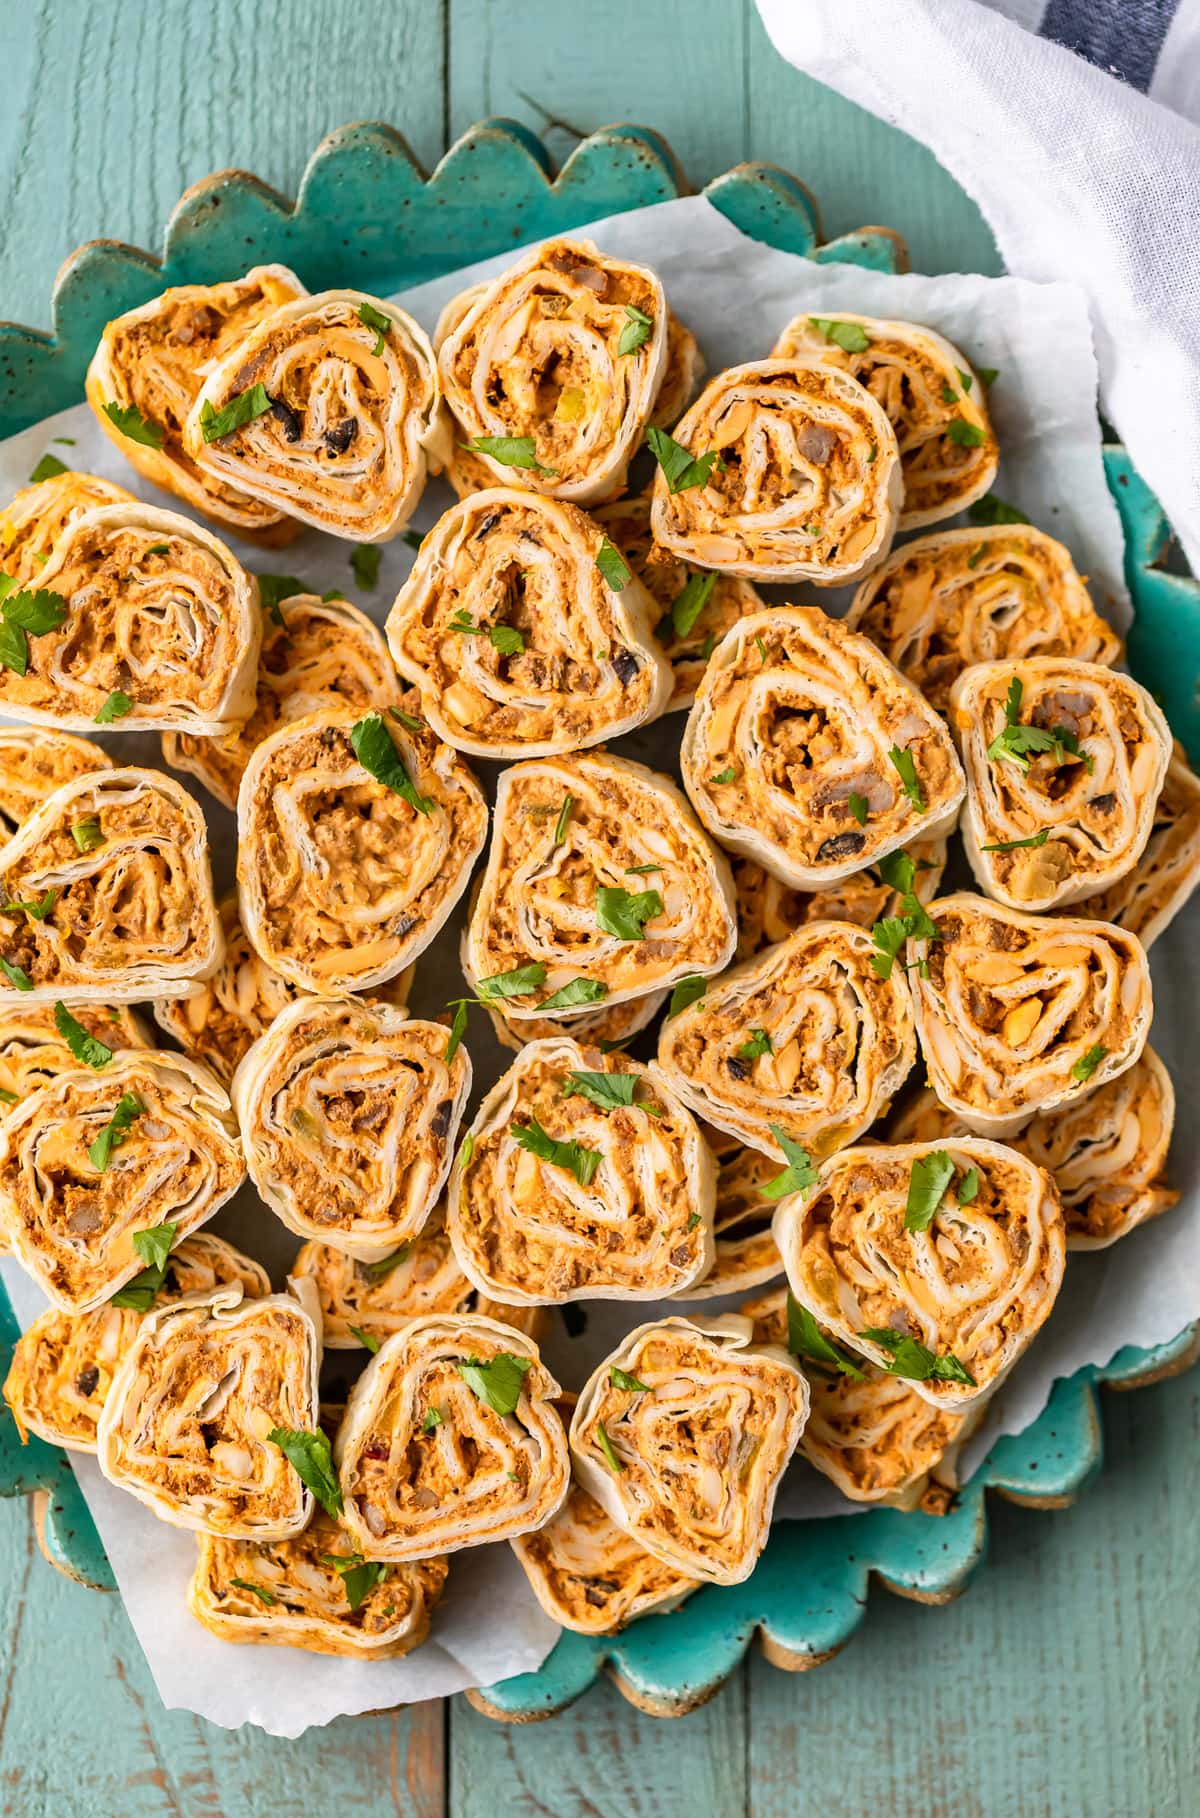 mexican roll ups arranged on a turquoise plate